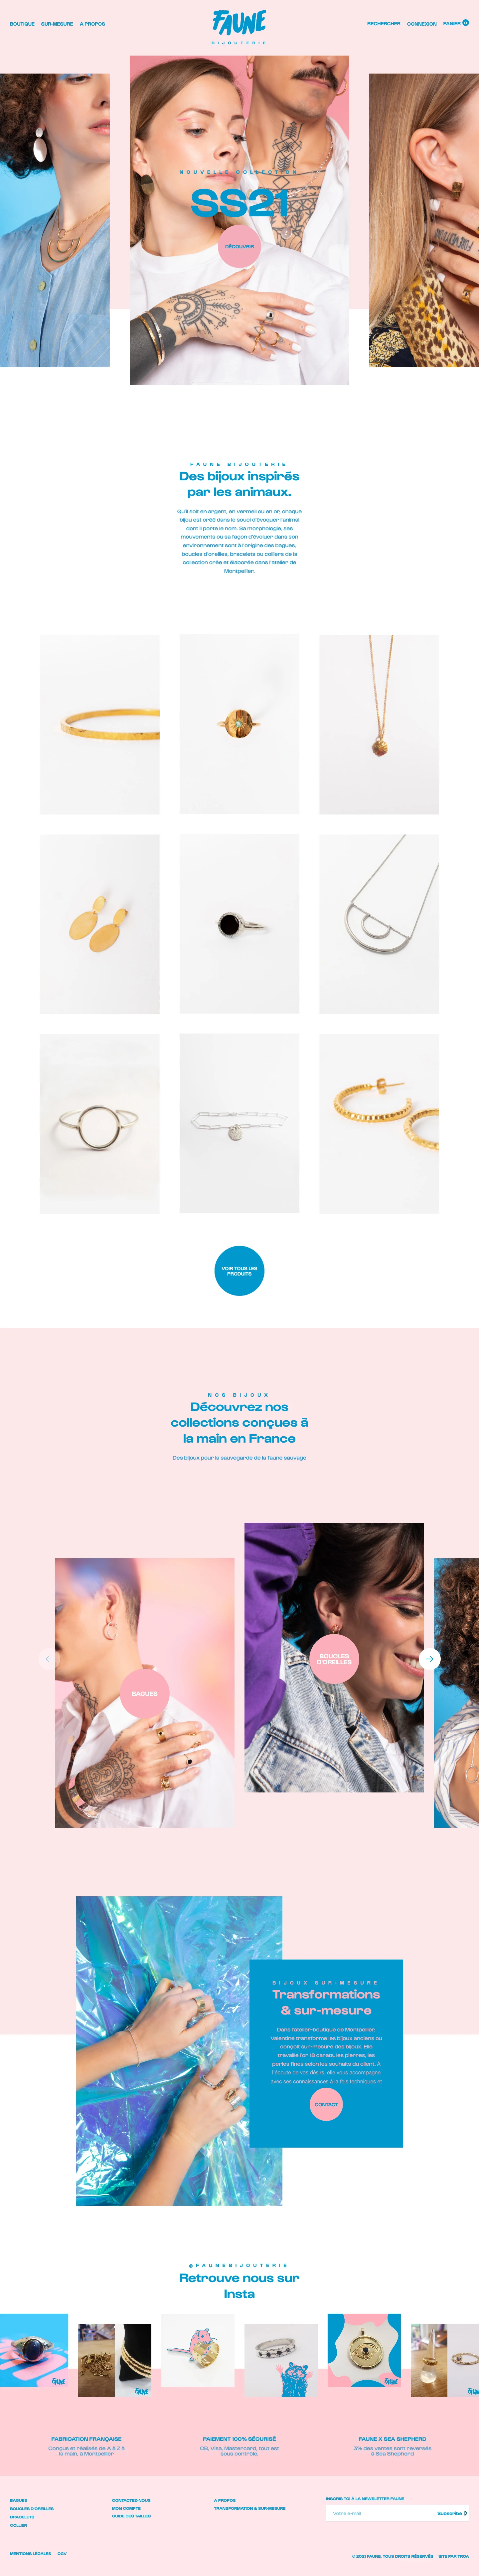 Fauna Landing Page Example: Rings, earrings, bracelets or necklaces created and crafted by hand in the Montpellier workshop.